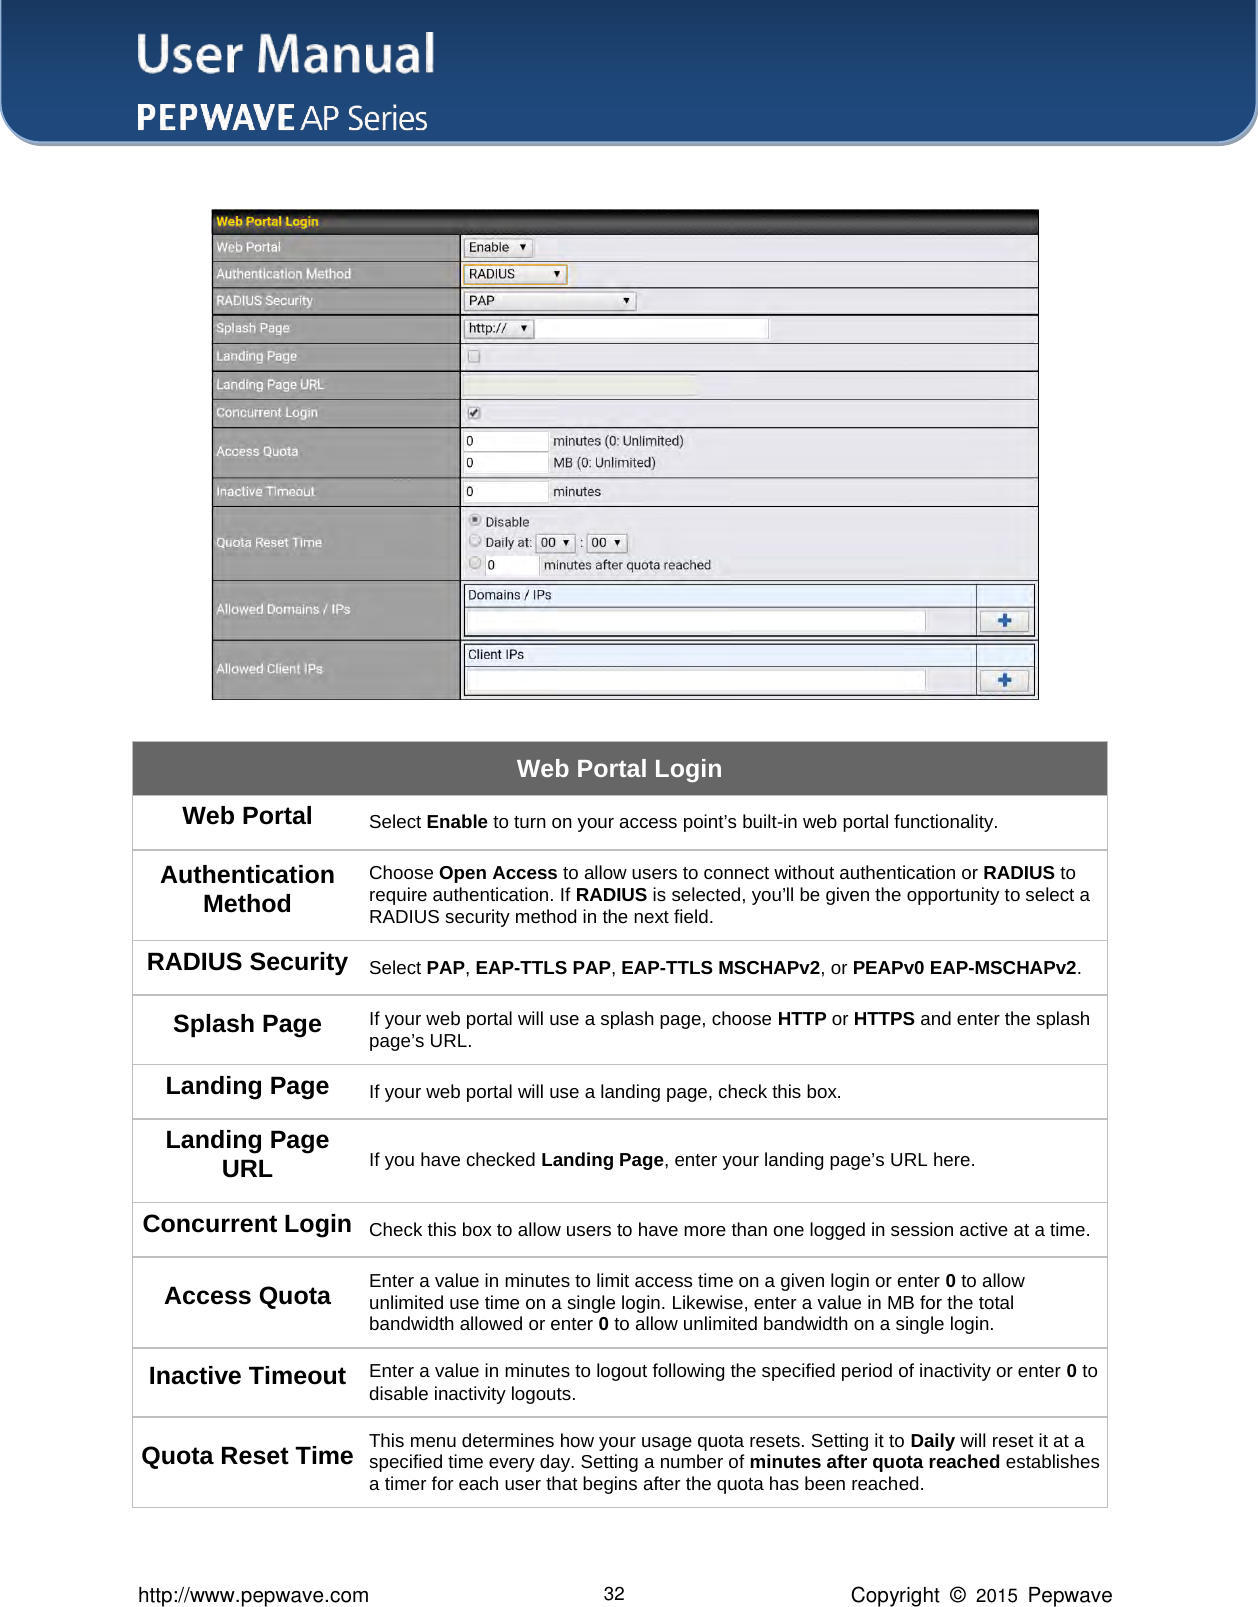 User Manual    http://www.pepwave.com 32 Copyright  ©  2015  Pepwave  Web Portal Login Web Portal Select Enable to turn on your access point’s built-in web portal functionality. Authentication Method Choose Open Access to allow users to connect without authentication or RADIUS to require authentication. If RADIUS is selected, you’ll be given the opportunity to select a RADIUS security method in the next field. RADIUS Security Select PAP, EAP-TTLS PAP, EAP-TTLS MSCHAPv2, or PEAPv0 EAP-MSCHAPv2. Splash Page If your web portal will use a splash page, choose HTTP or HTTPS and enter the splash page’s URL. Landing Page If your web portal will use a landing page, check this box. Landing Page URL If you have checked Landing Page, enter your landing page’s URL here. Concurrent Login Check this box to allow users to have more than one logged in session active at a time. Access Quota Enter a value in minutes to limit access time on a given login or enter 0 to allow unlimited use time on a single login. Likewise, enter a value in MB for the total bandwidth allowed or enter 0 to allow unlimited bandwidth on a single login. Inactive Timeout Enter a value in minutes to logout following the specified period of inactivity or enter 0 to disable inactivity logouts. Quota Reset Time This menu determines how your usage quota resets. Setting it to Daily will reset it at a specified time every day. Setting a number of minutes after quota reached establishes a timer for each user that begins after the quota has been reached. 